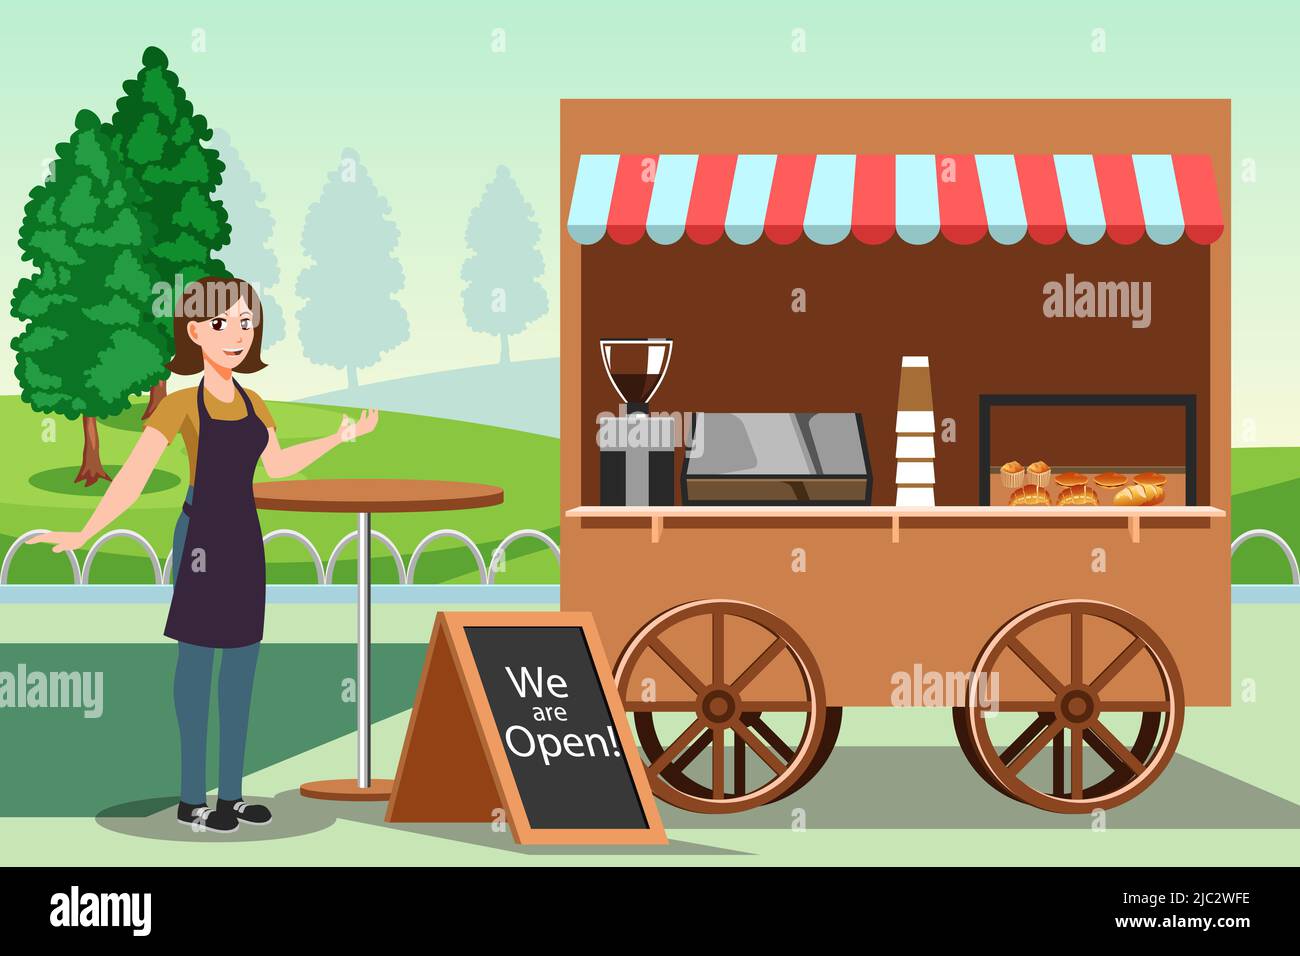 A vector illustration of Small Business Owner Bakery Shop Food Stall Stock Vector